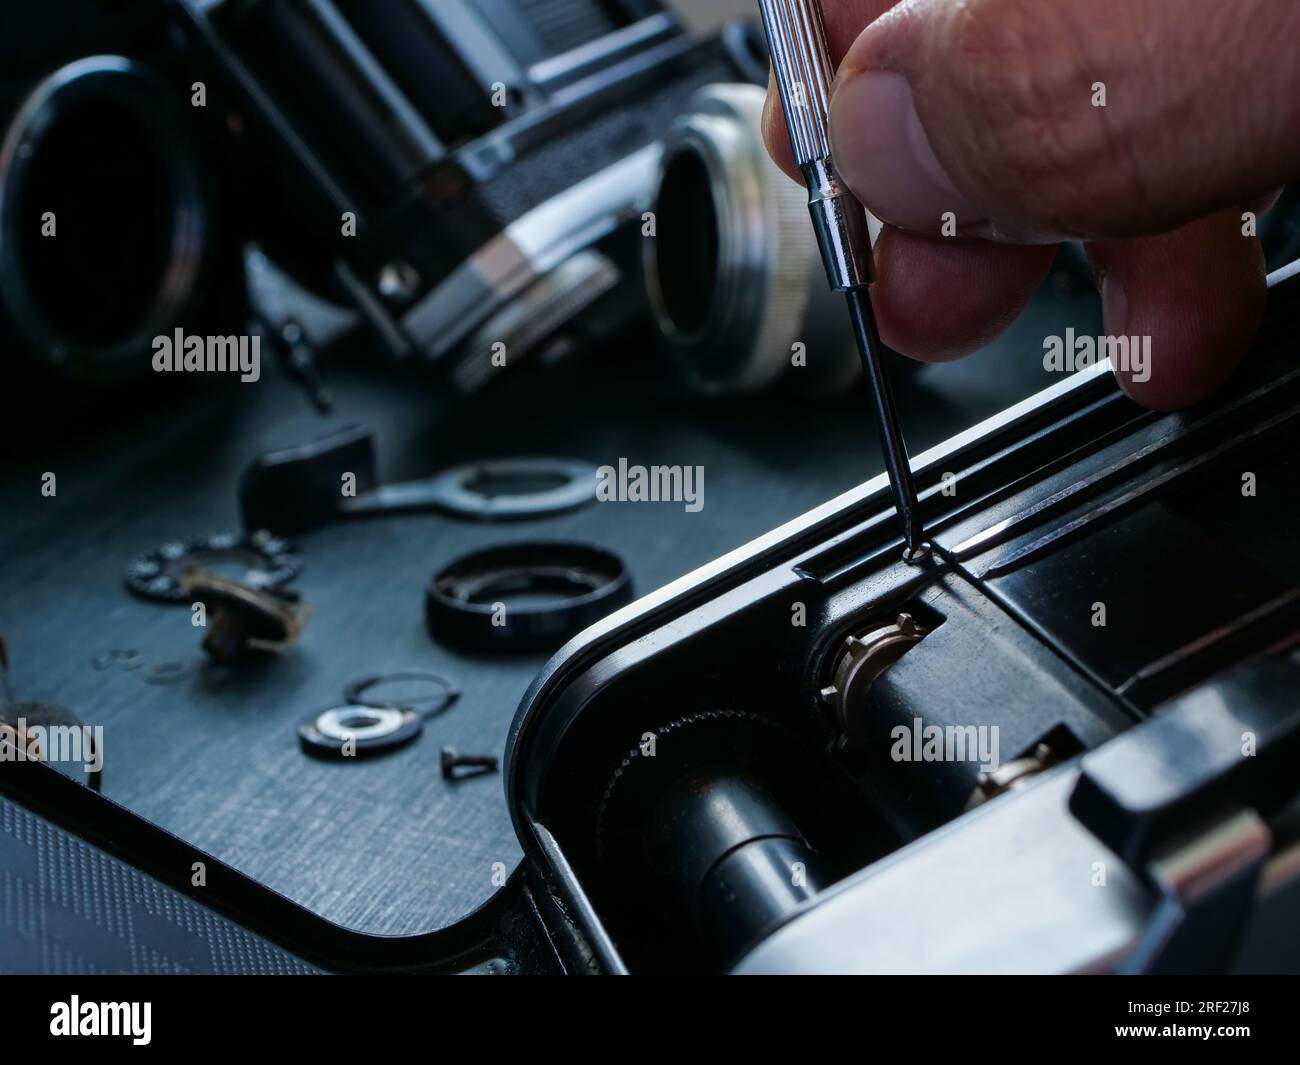 Close-up of hand with a screwdriver repairing an old film camera. Stock Photo